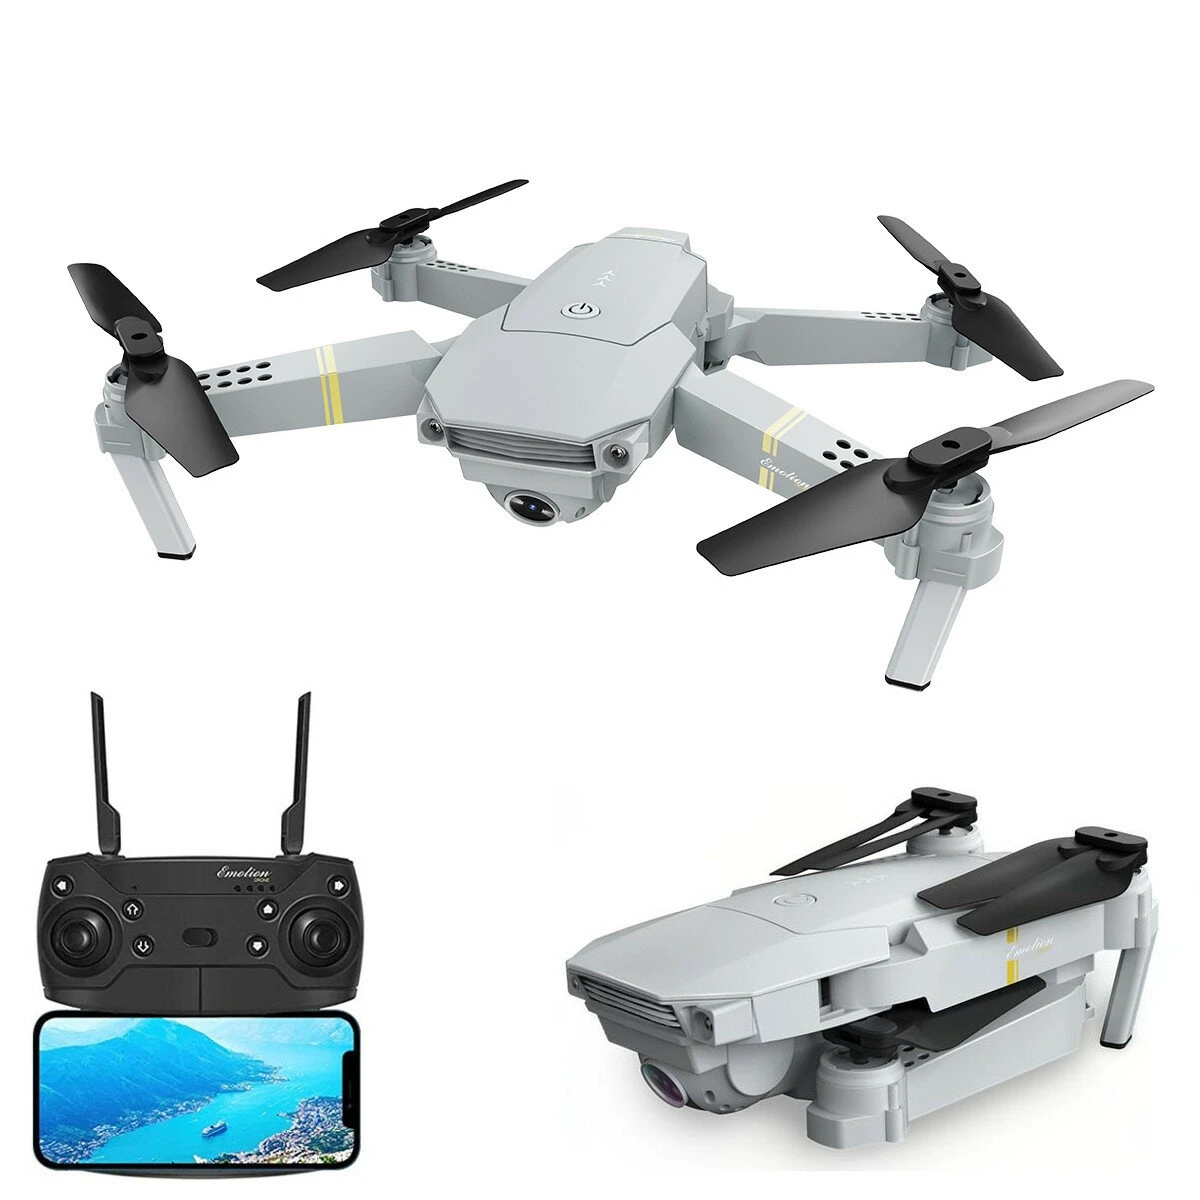 One Key Take Off/Landing Quadcopter Drone With Camera Live Video EACHINE E58 WiFi FPV Quadcopter with 120° FOV 720P HD Camera Foldable Drone RTF 3D Flip APP Control（3Pcs Batteries） Altitude Hold 